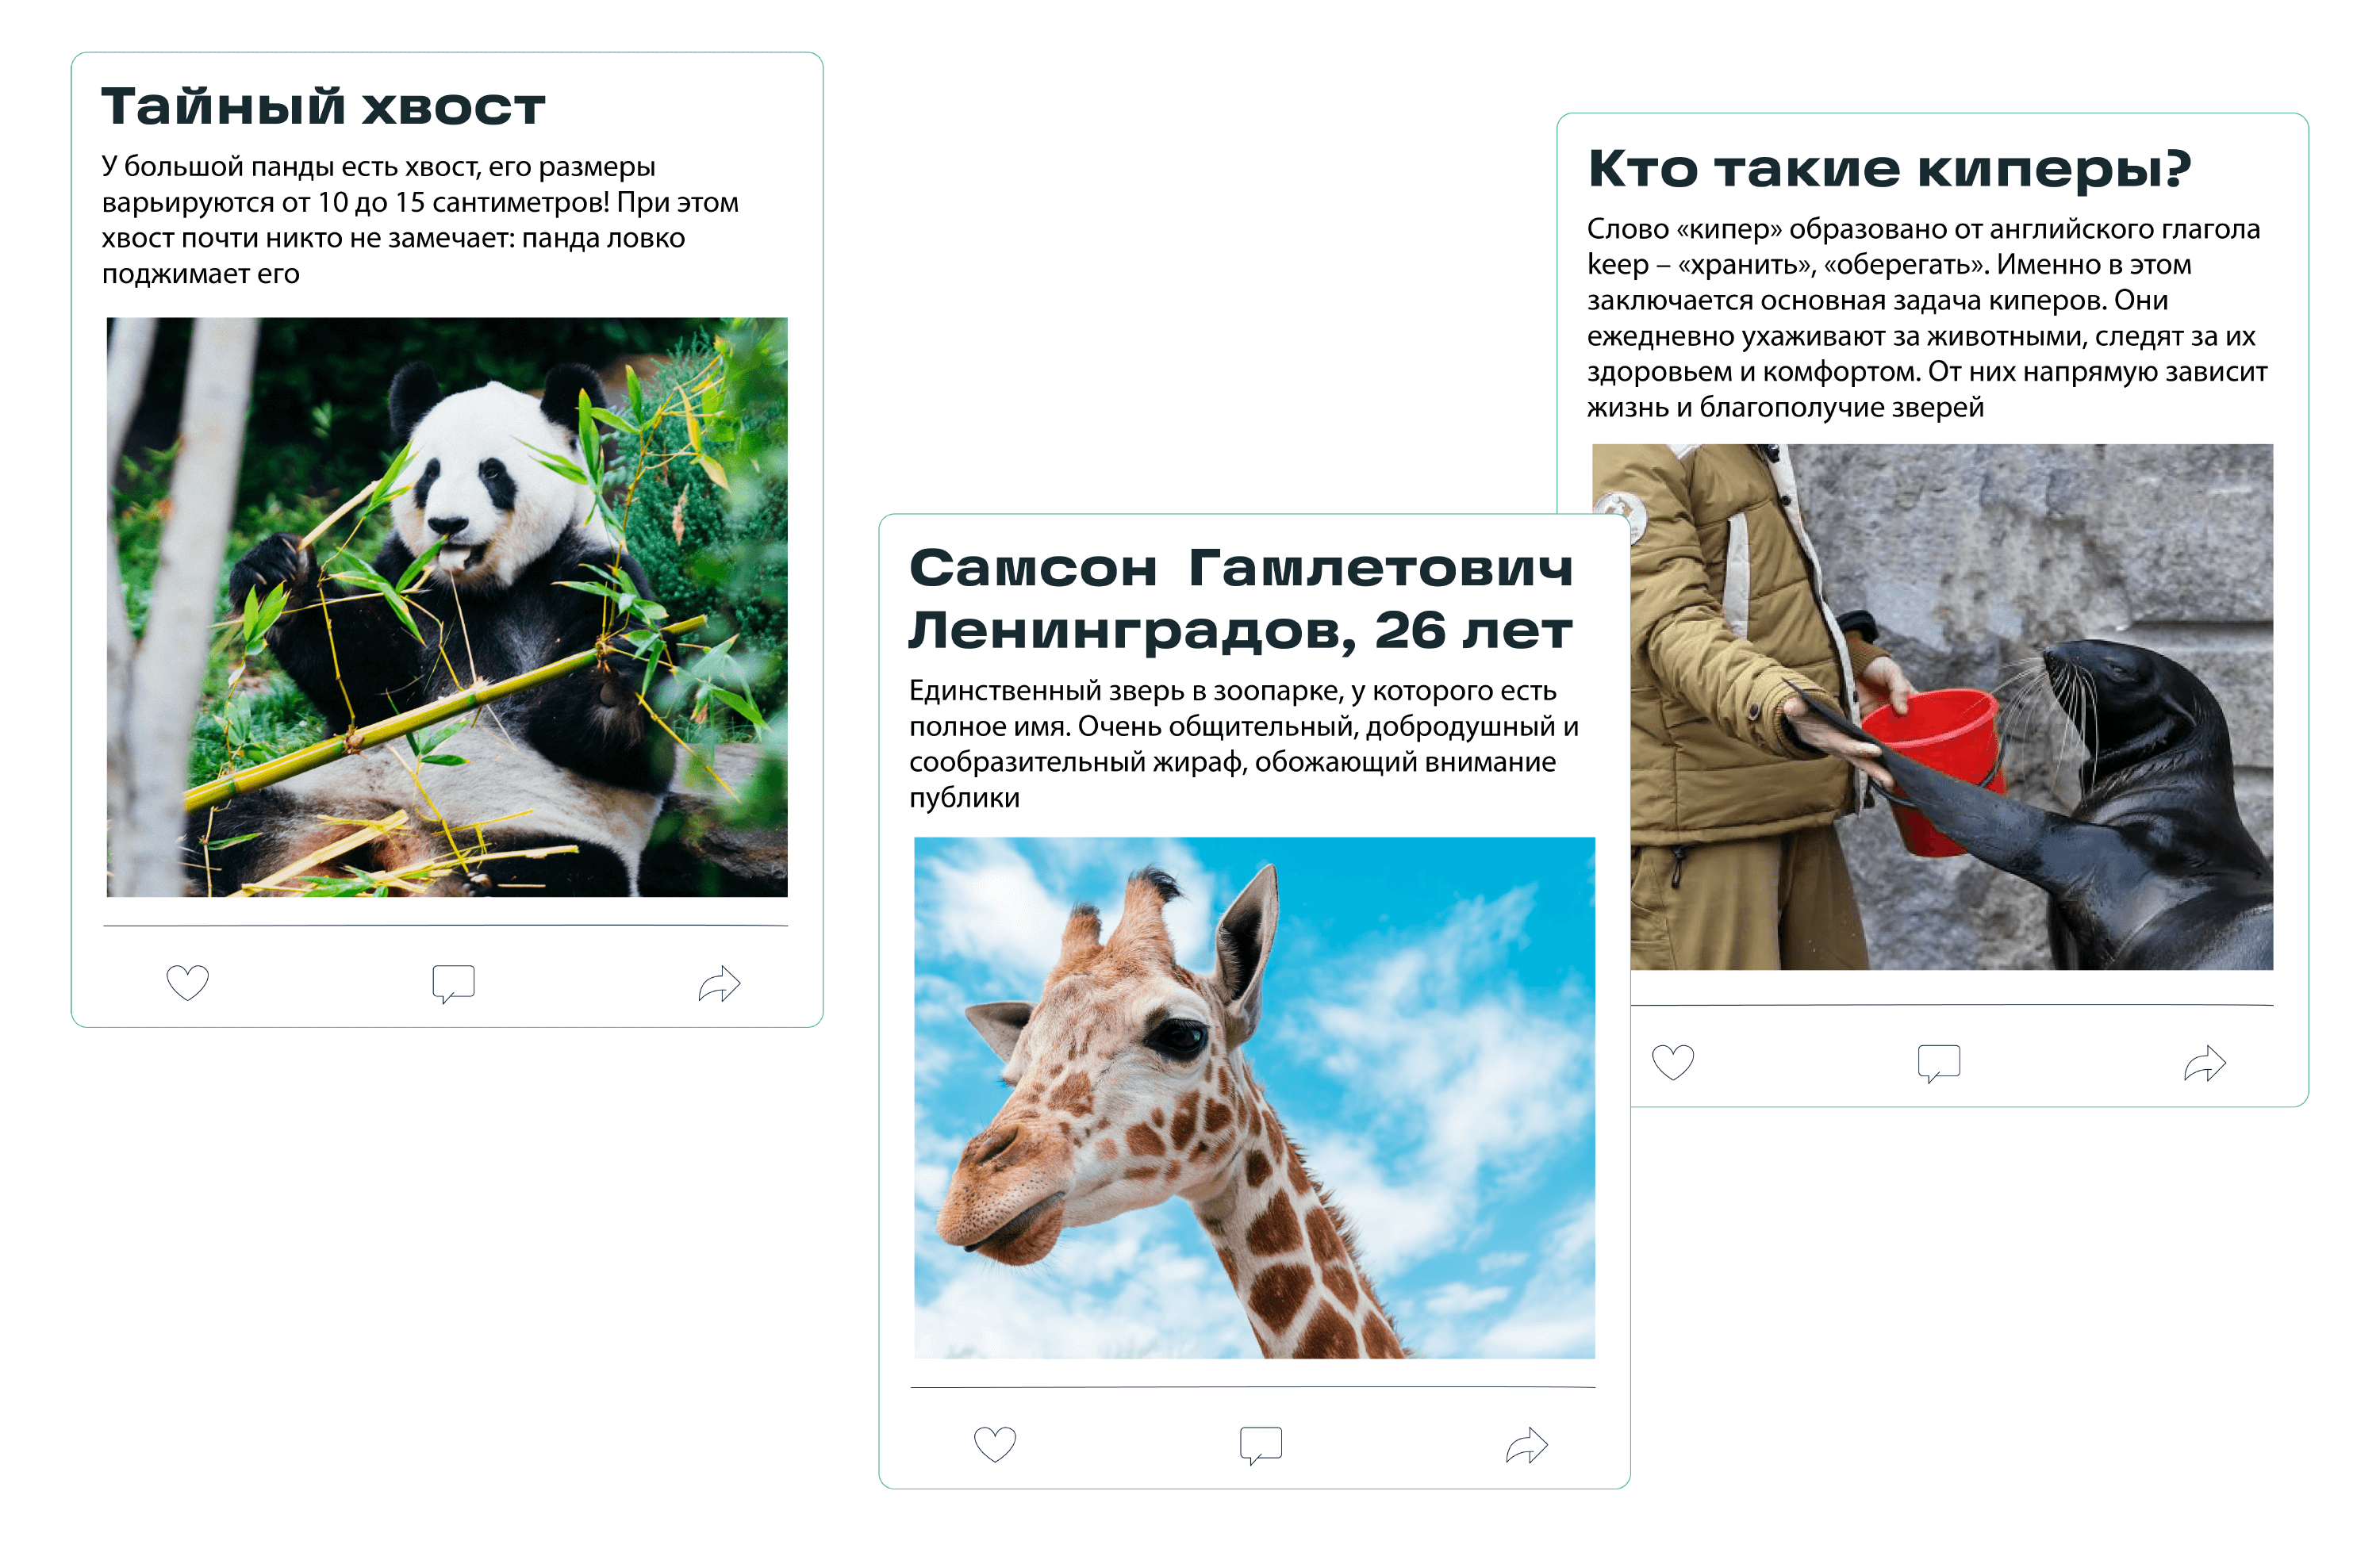 moscow zoo identity cards